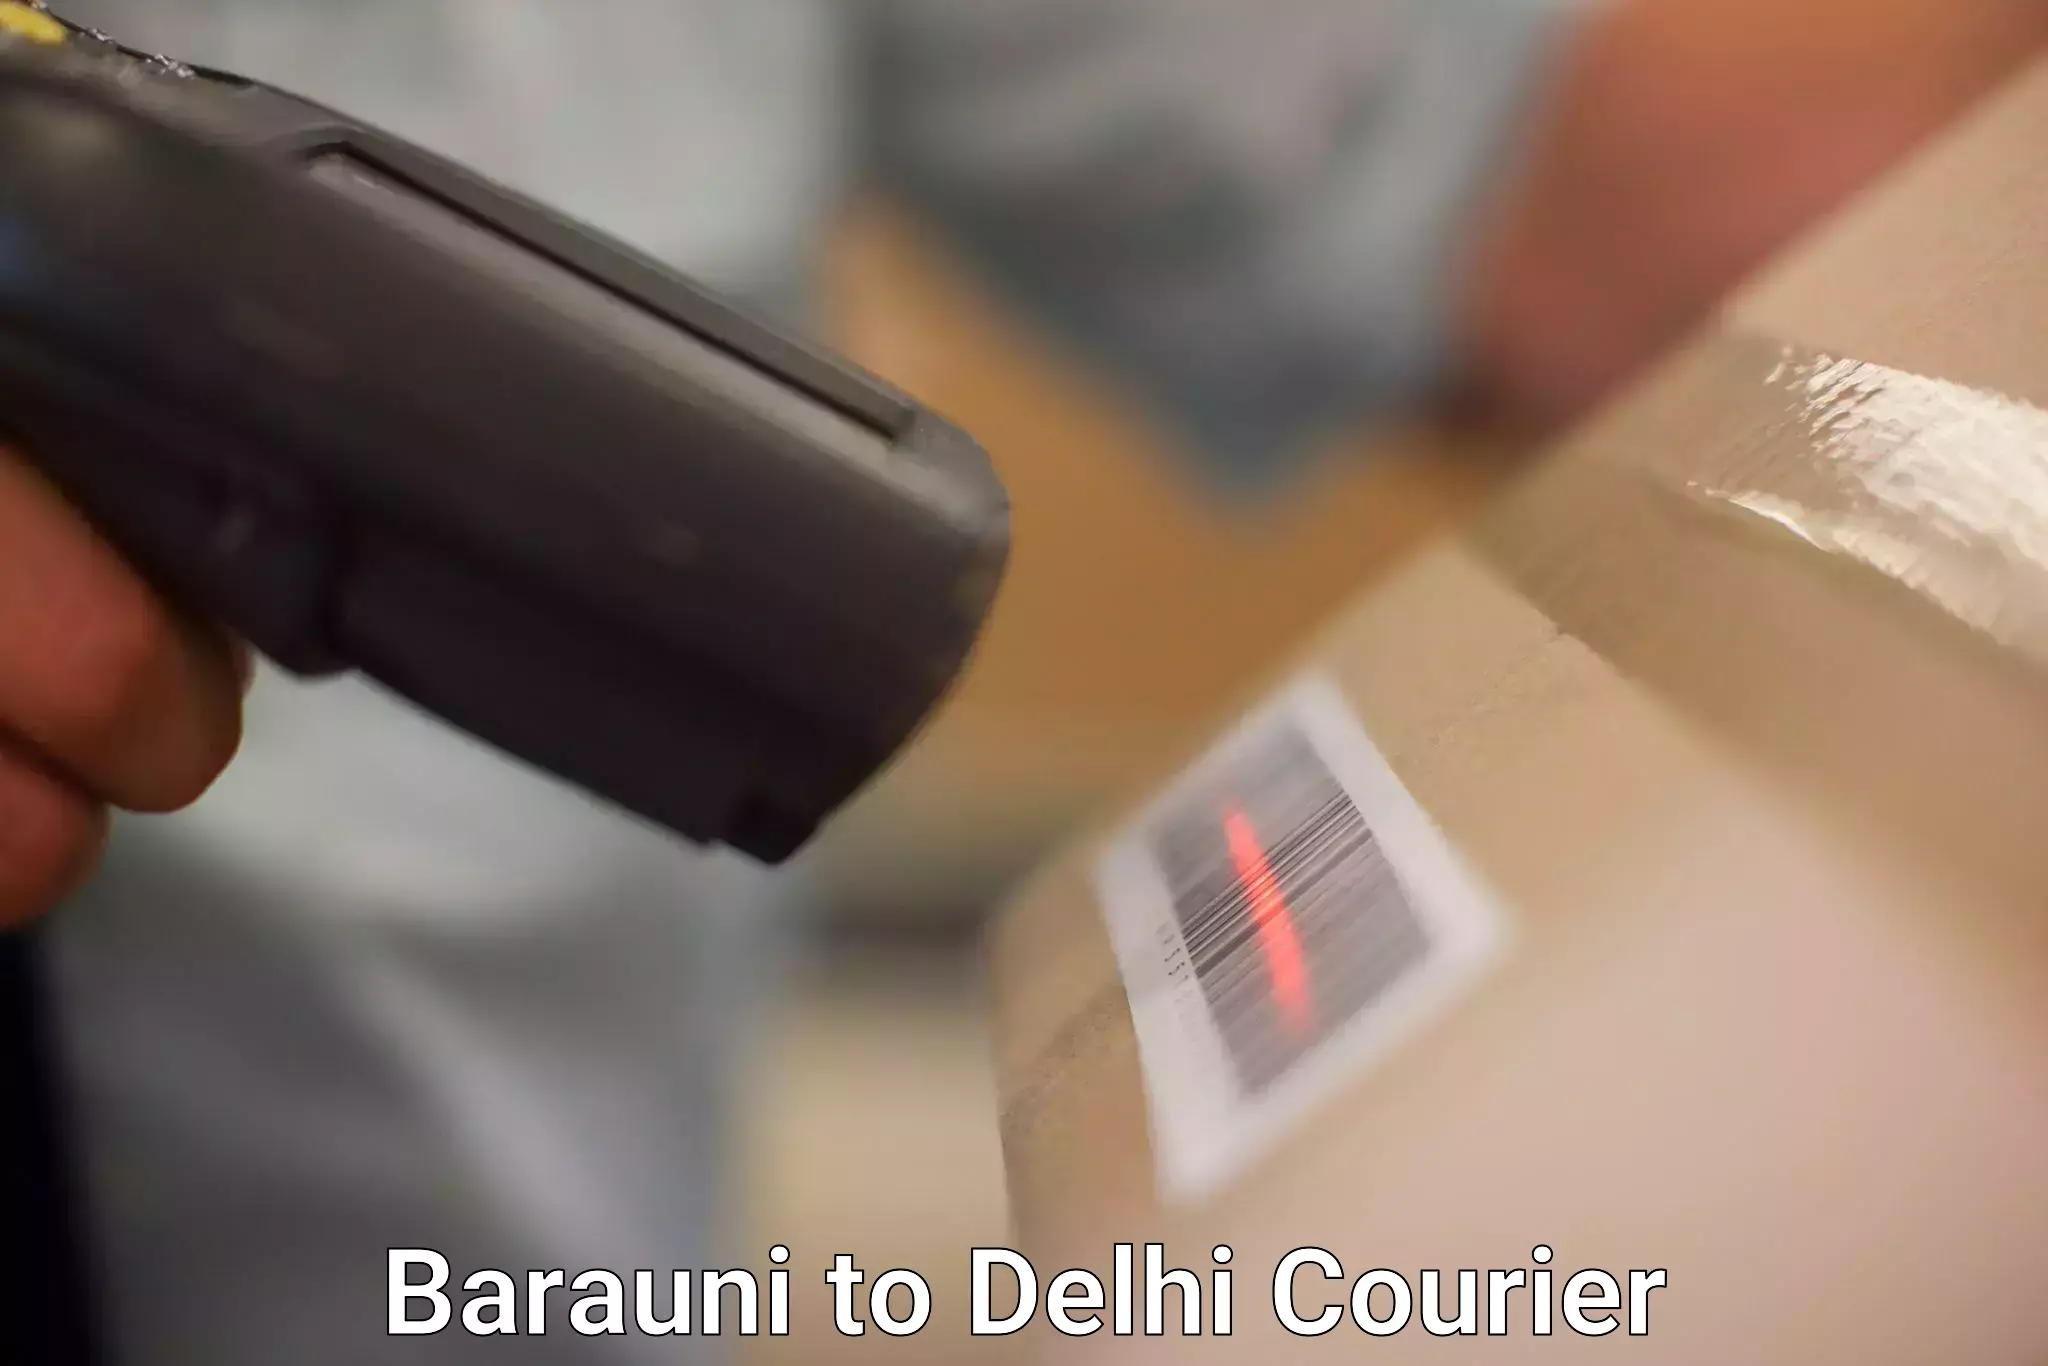 State-of-the-art courier technology Barauni to Lodhi Road